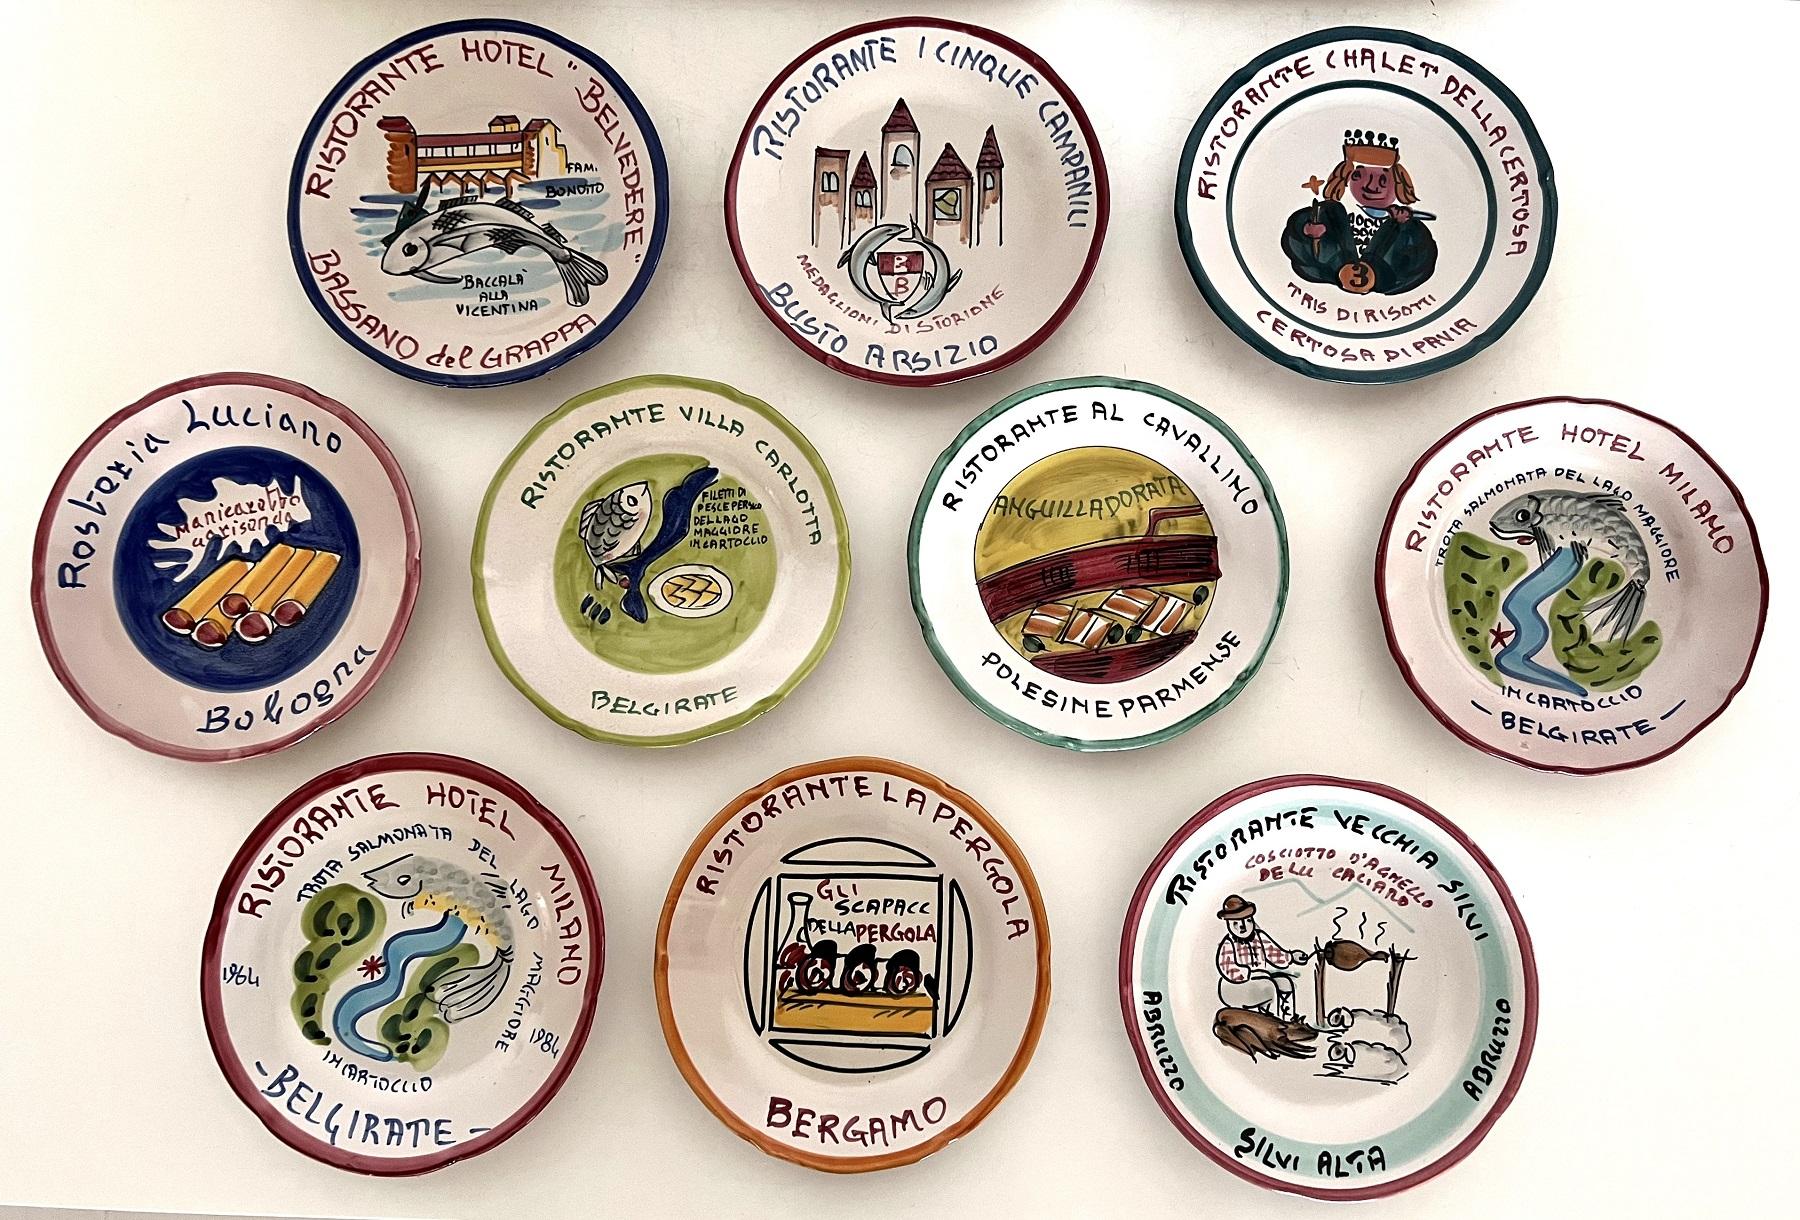 A set of 10 different restaurant collectible plates made of hand-painted ceramic.
Made in Italy in the 70 - 90s.
These plates were not used in the restaurants.
They were given away by the restaurants, which are named on the plates, to the customers